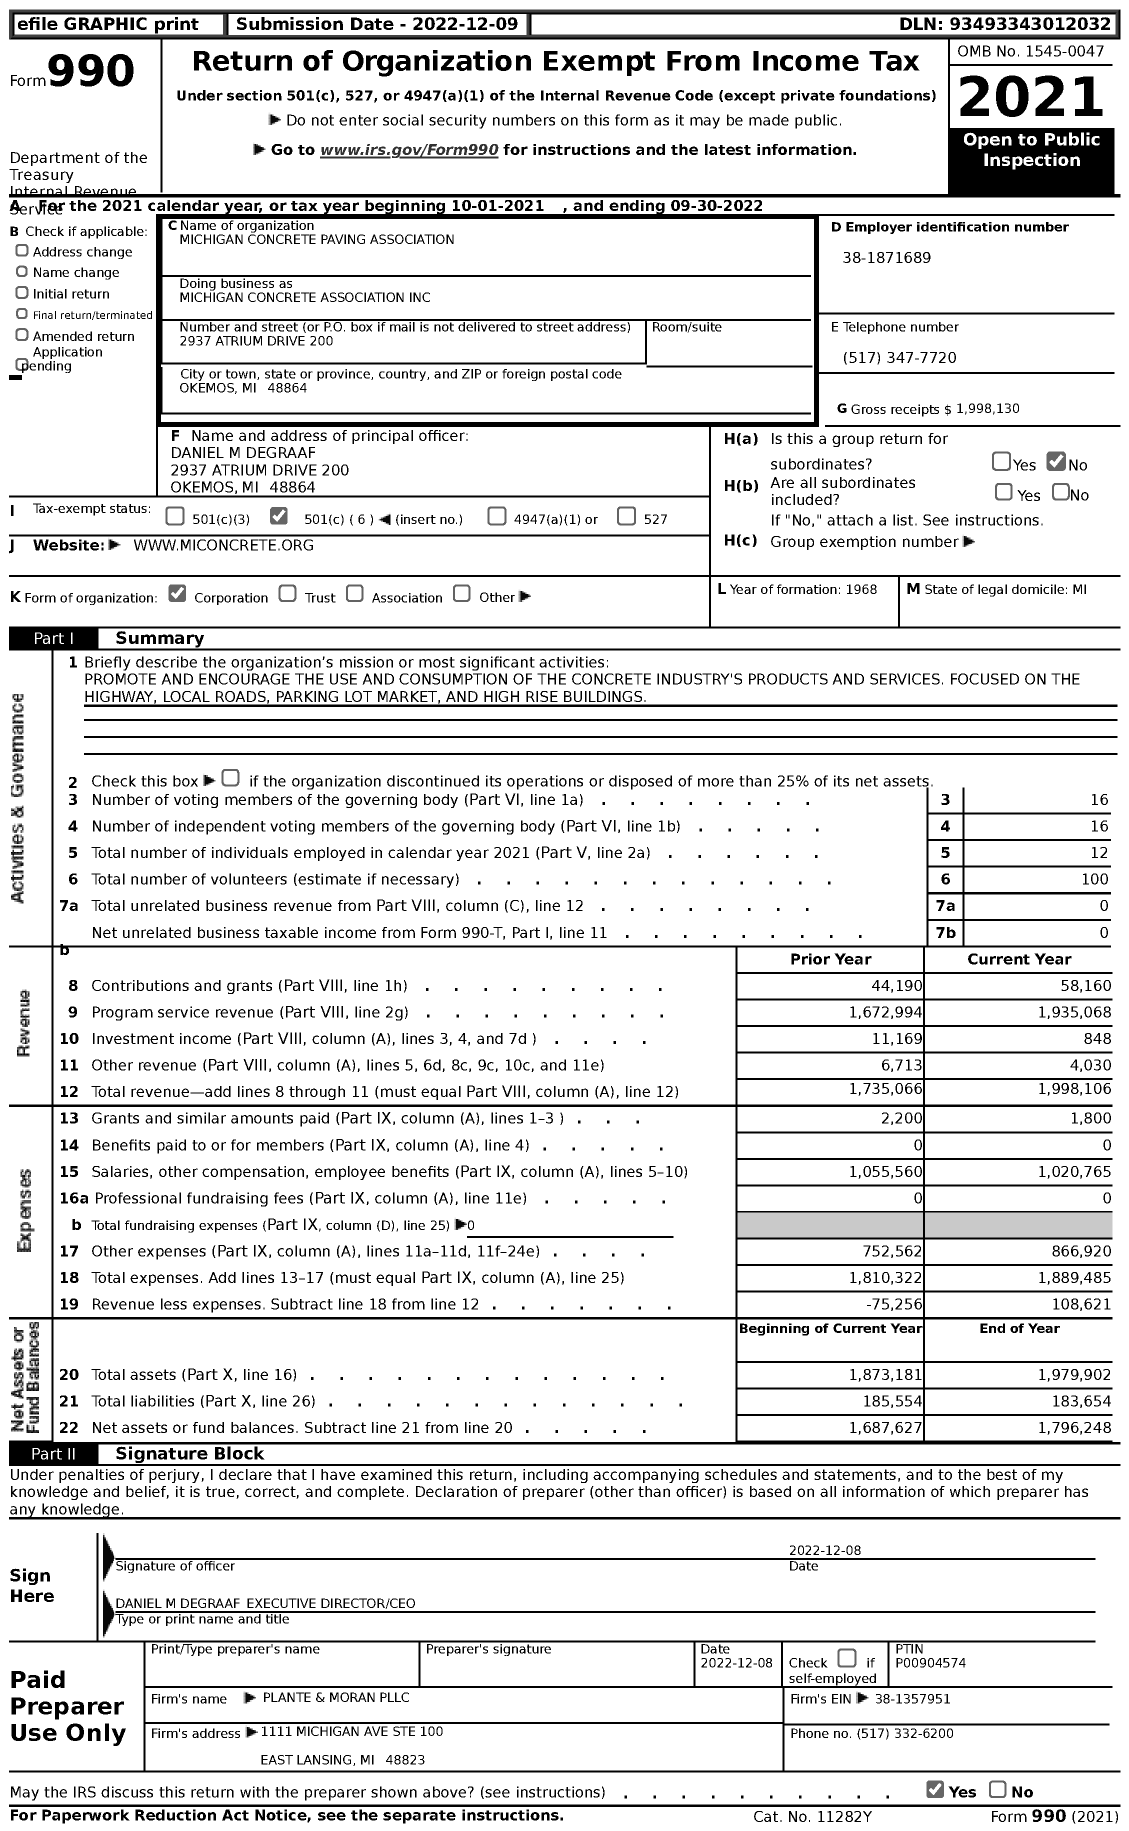 Image of first page of 2021 Form 990 for Michigan Concrete Association (MCA)